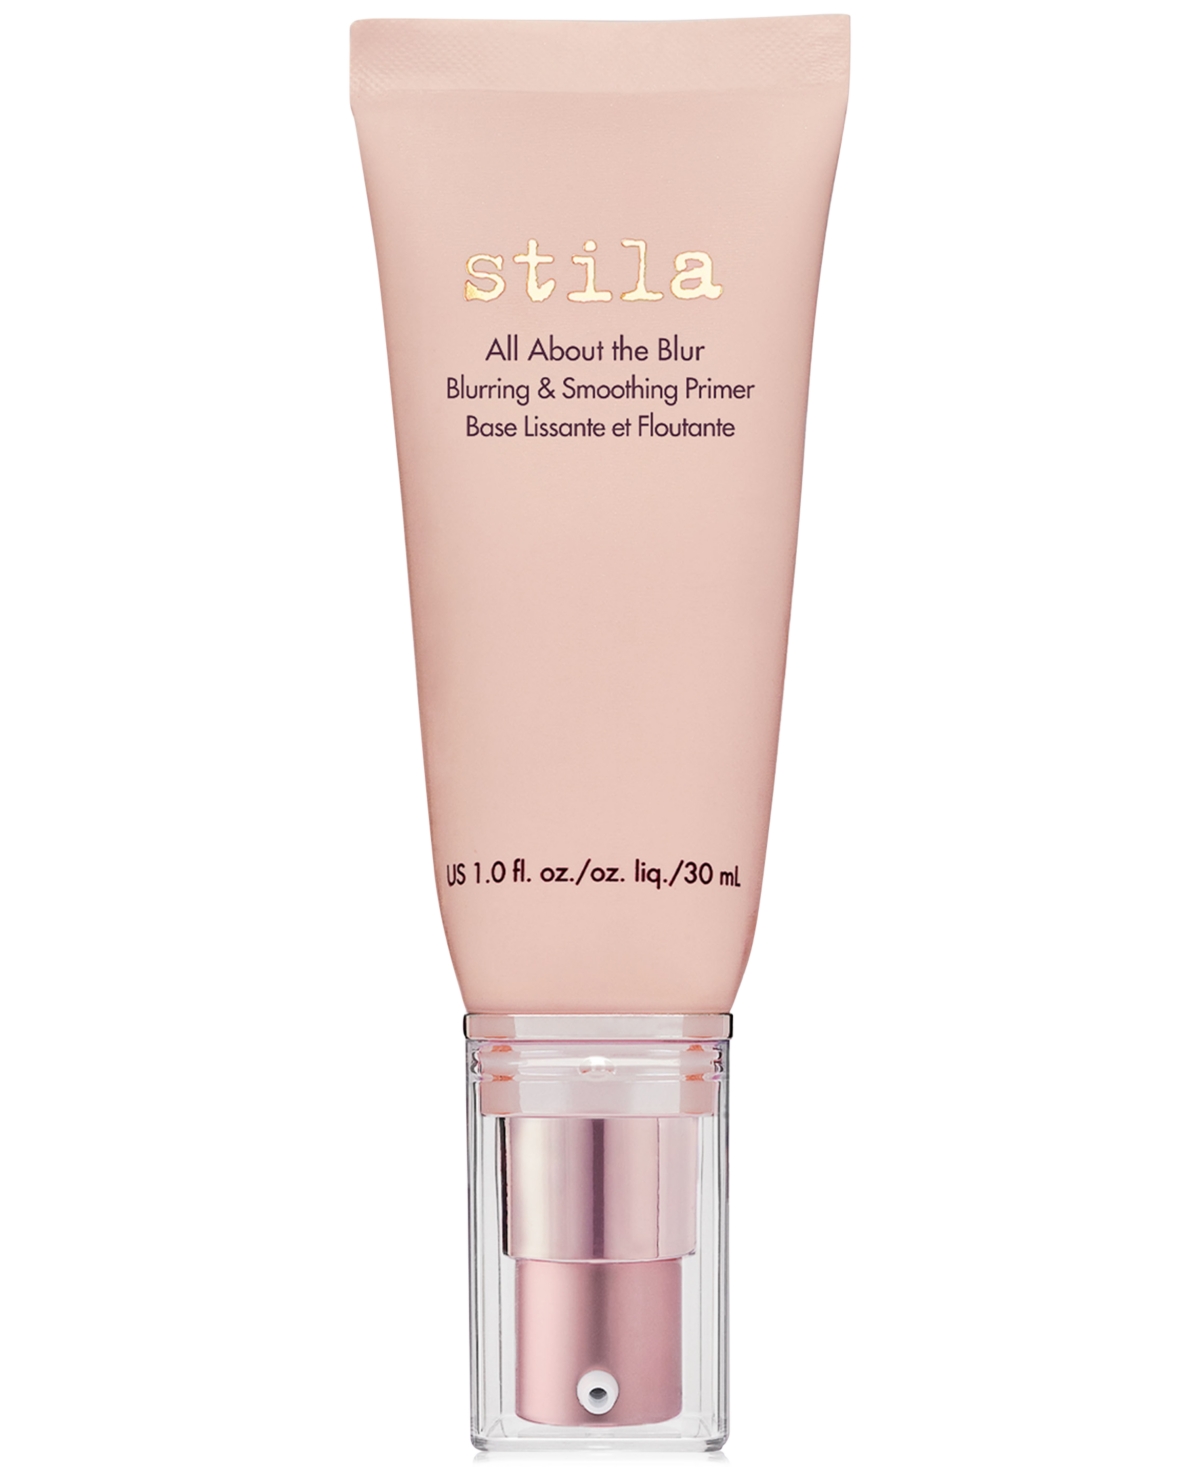 Shop Stila All About The Blur Blurring & Smoothing Primer